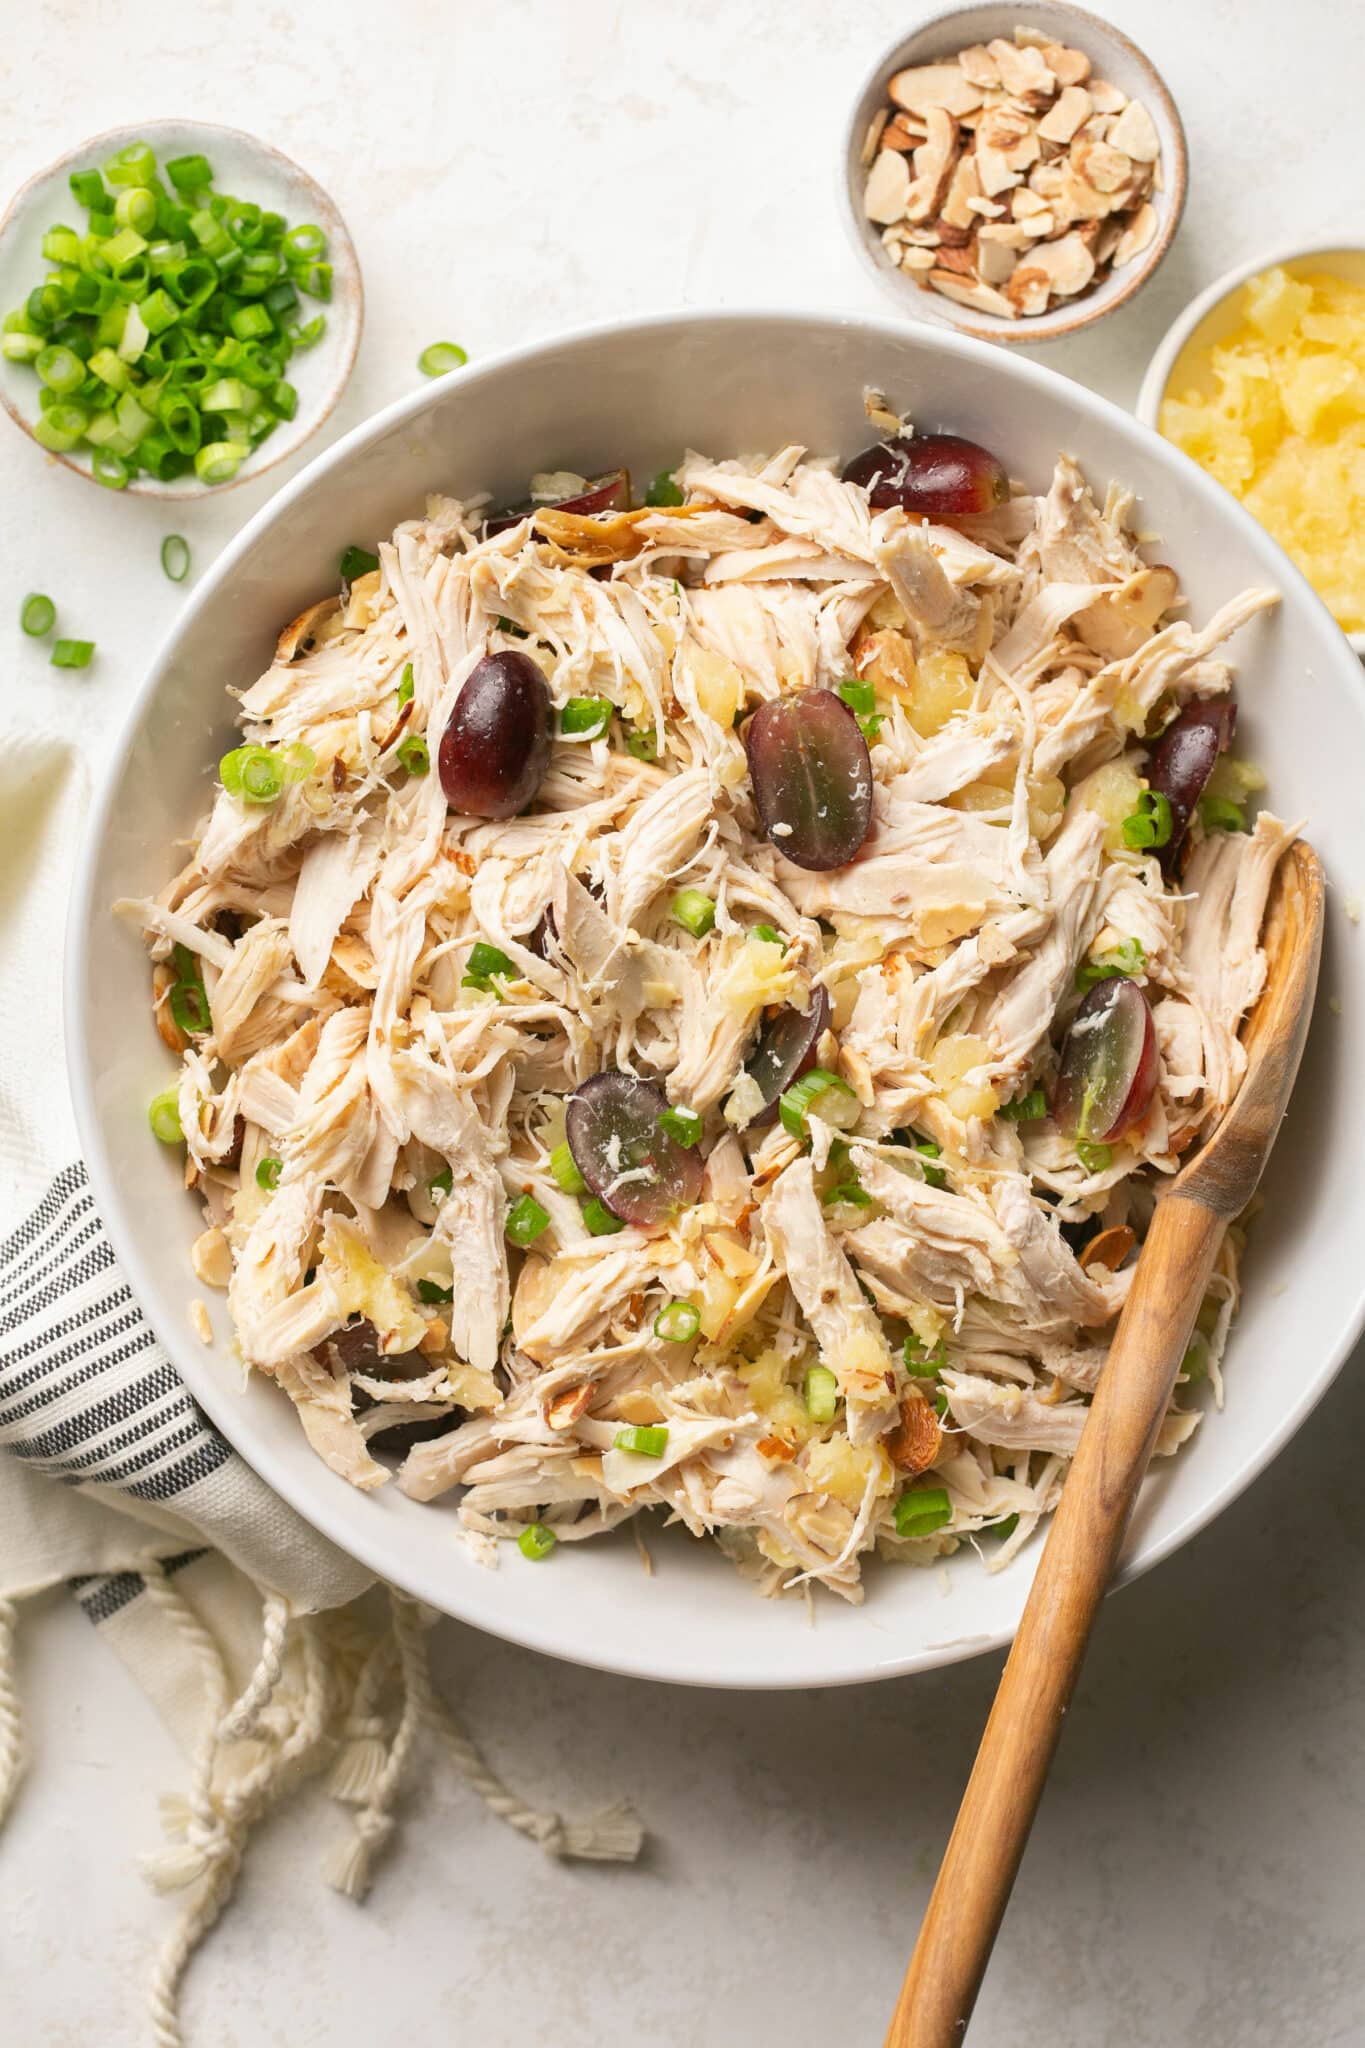 Mixing shredded chicken with grapes and green onions.